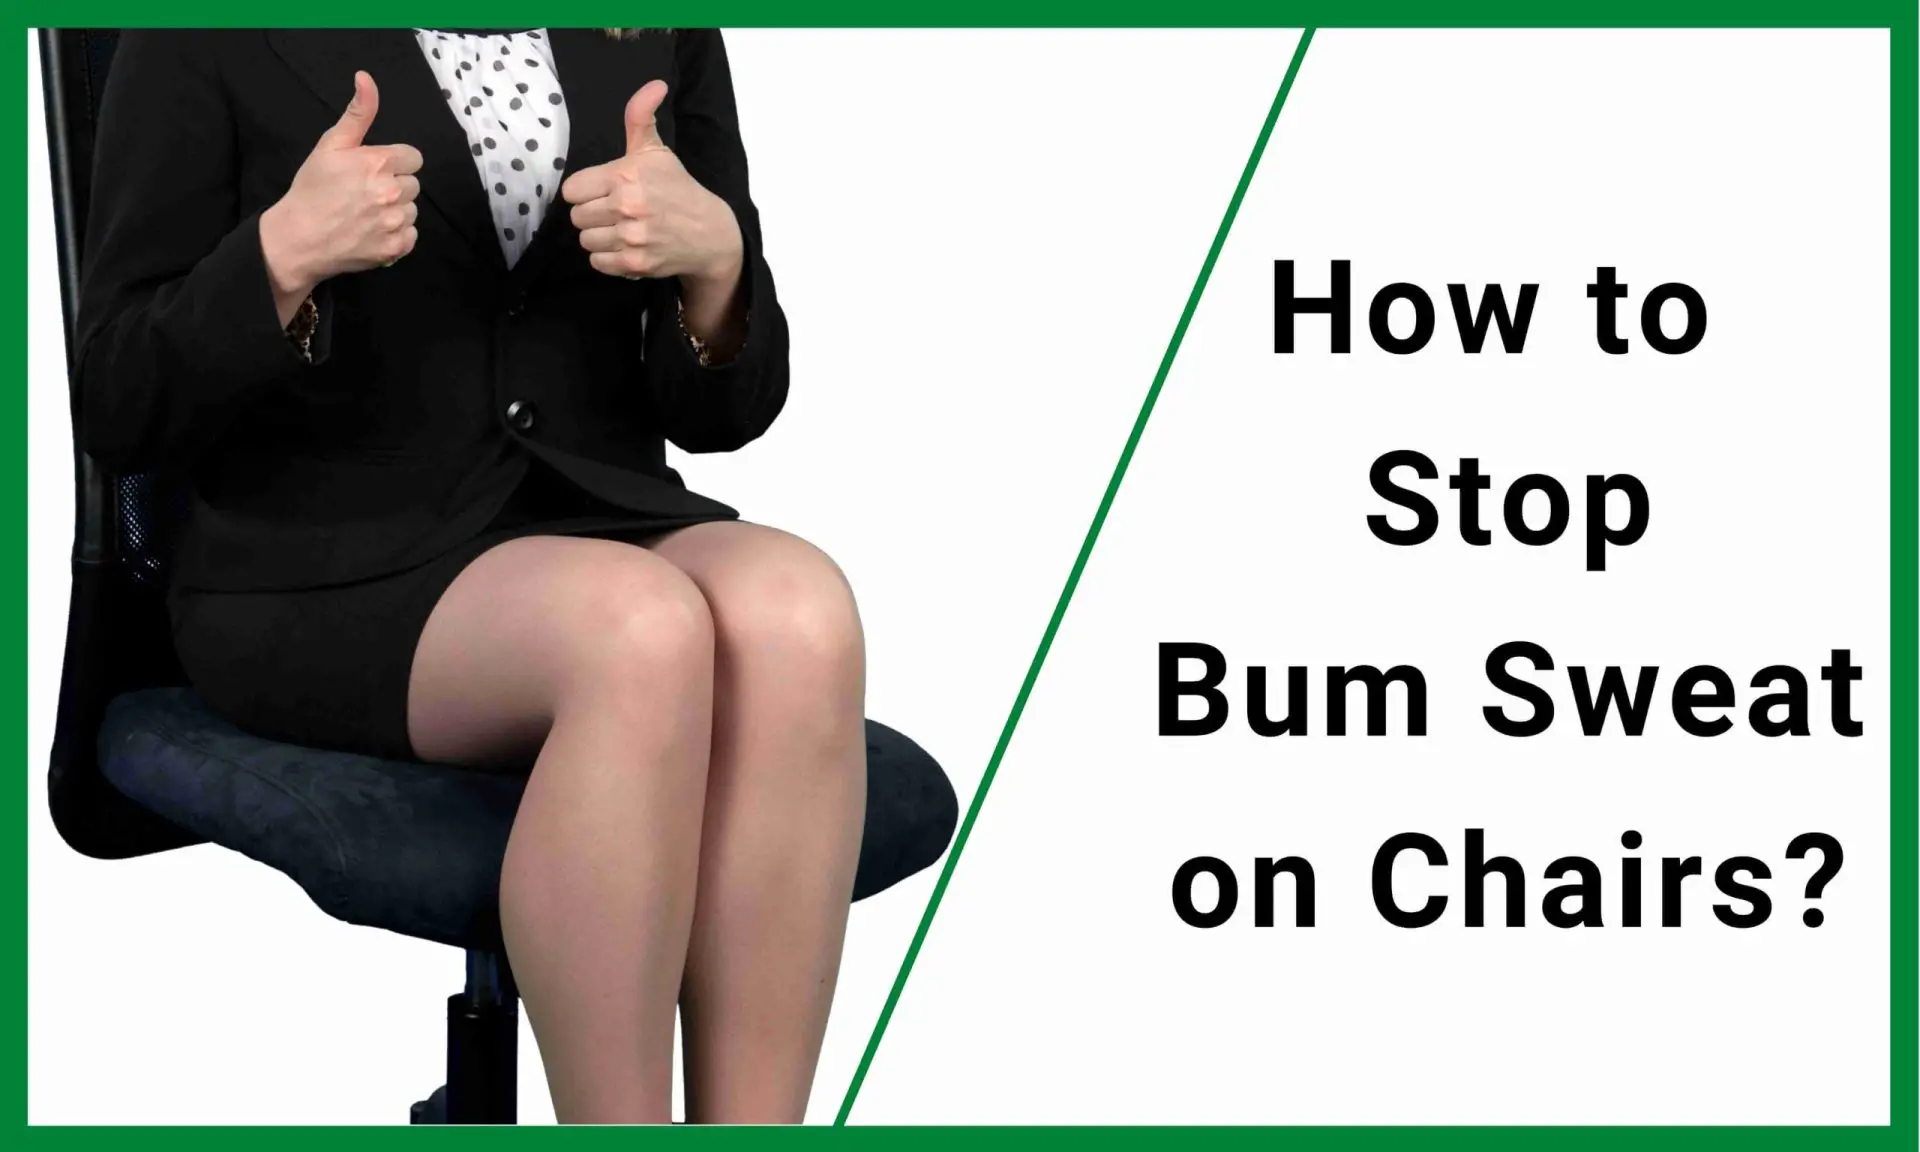 How to Stop bum Sweat on Chairs?